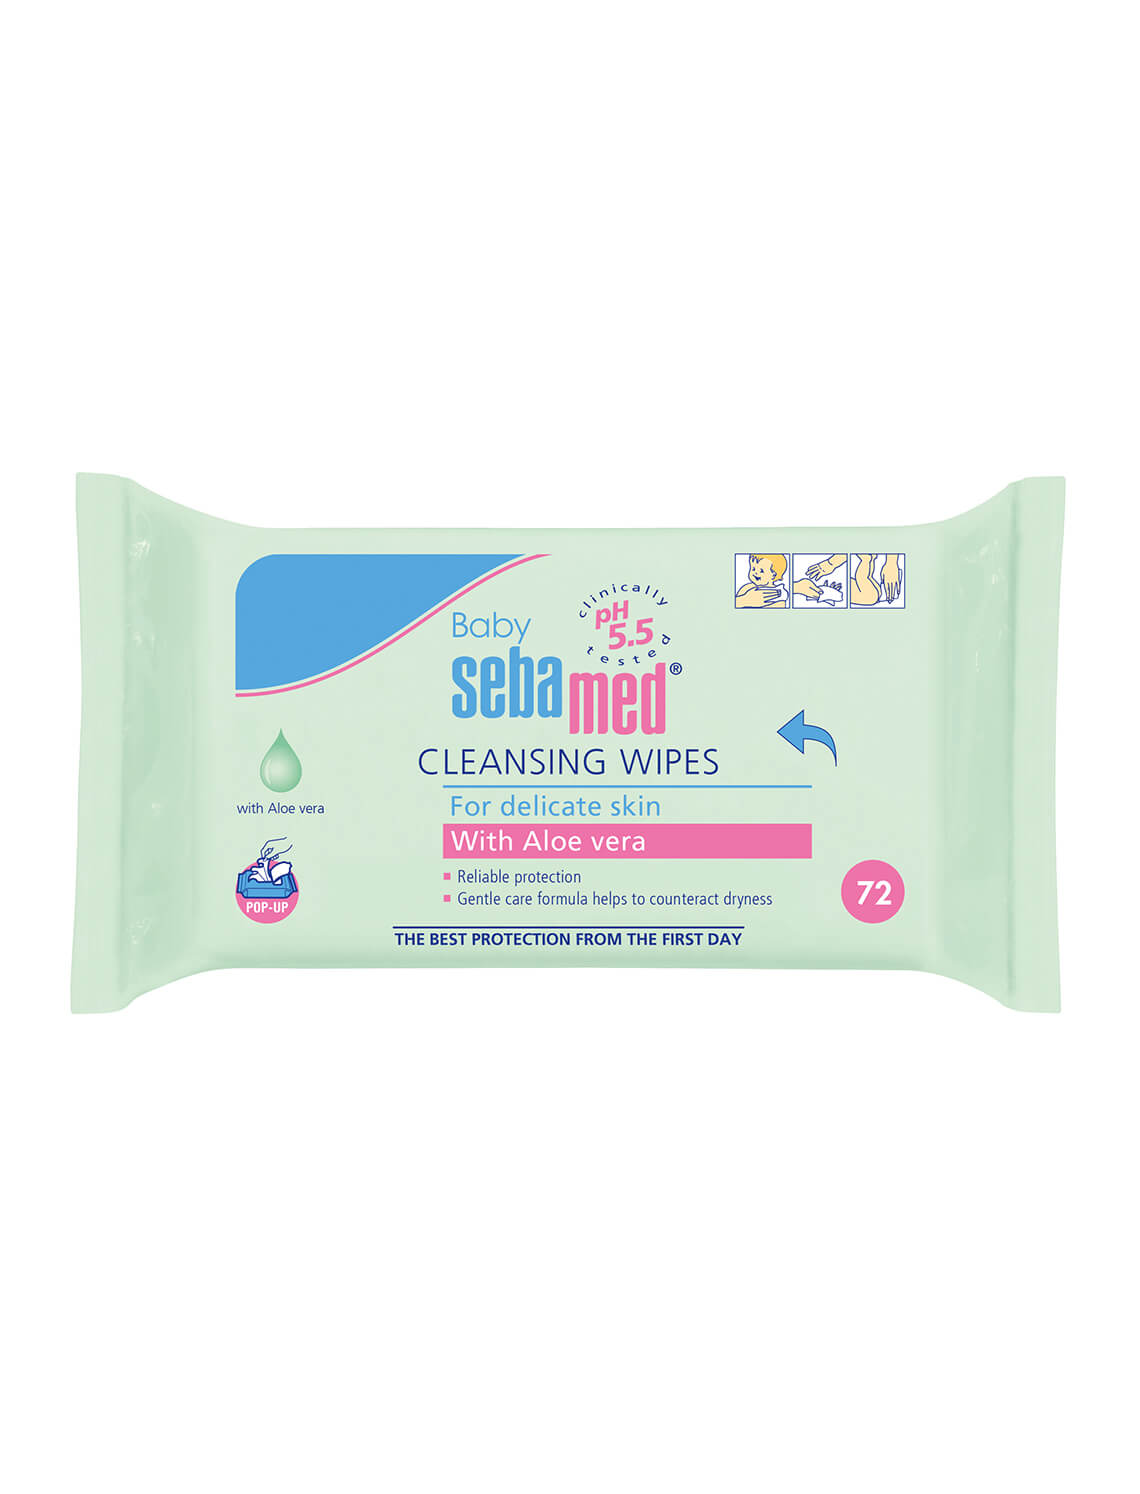 BABY CLEANSING WIPES WITH ALOE VERA